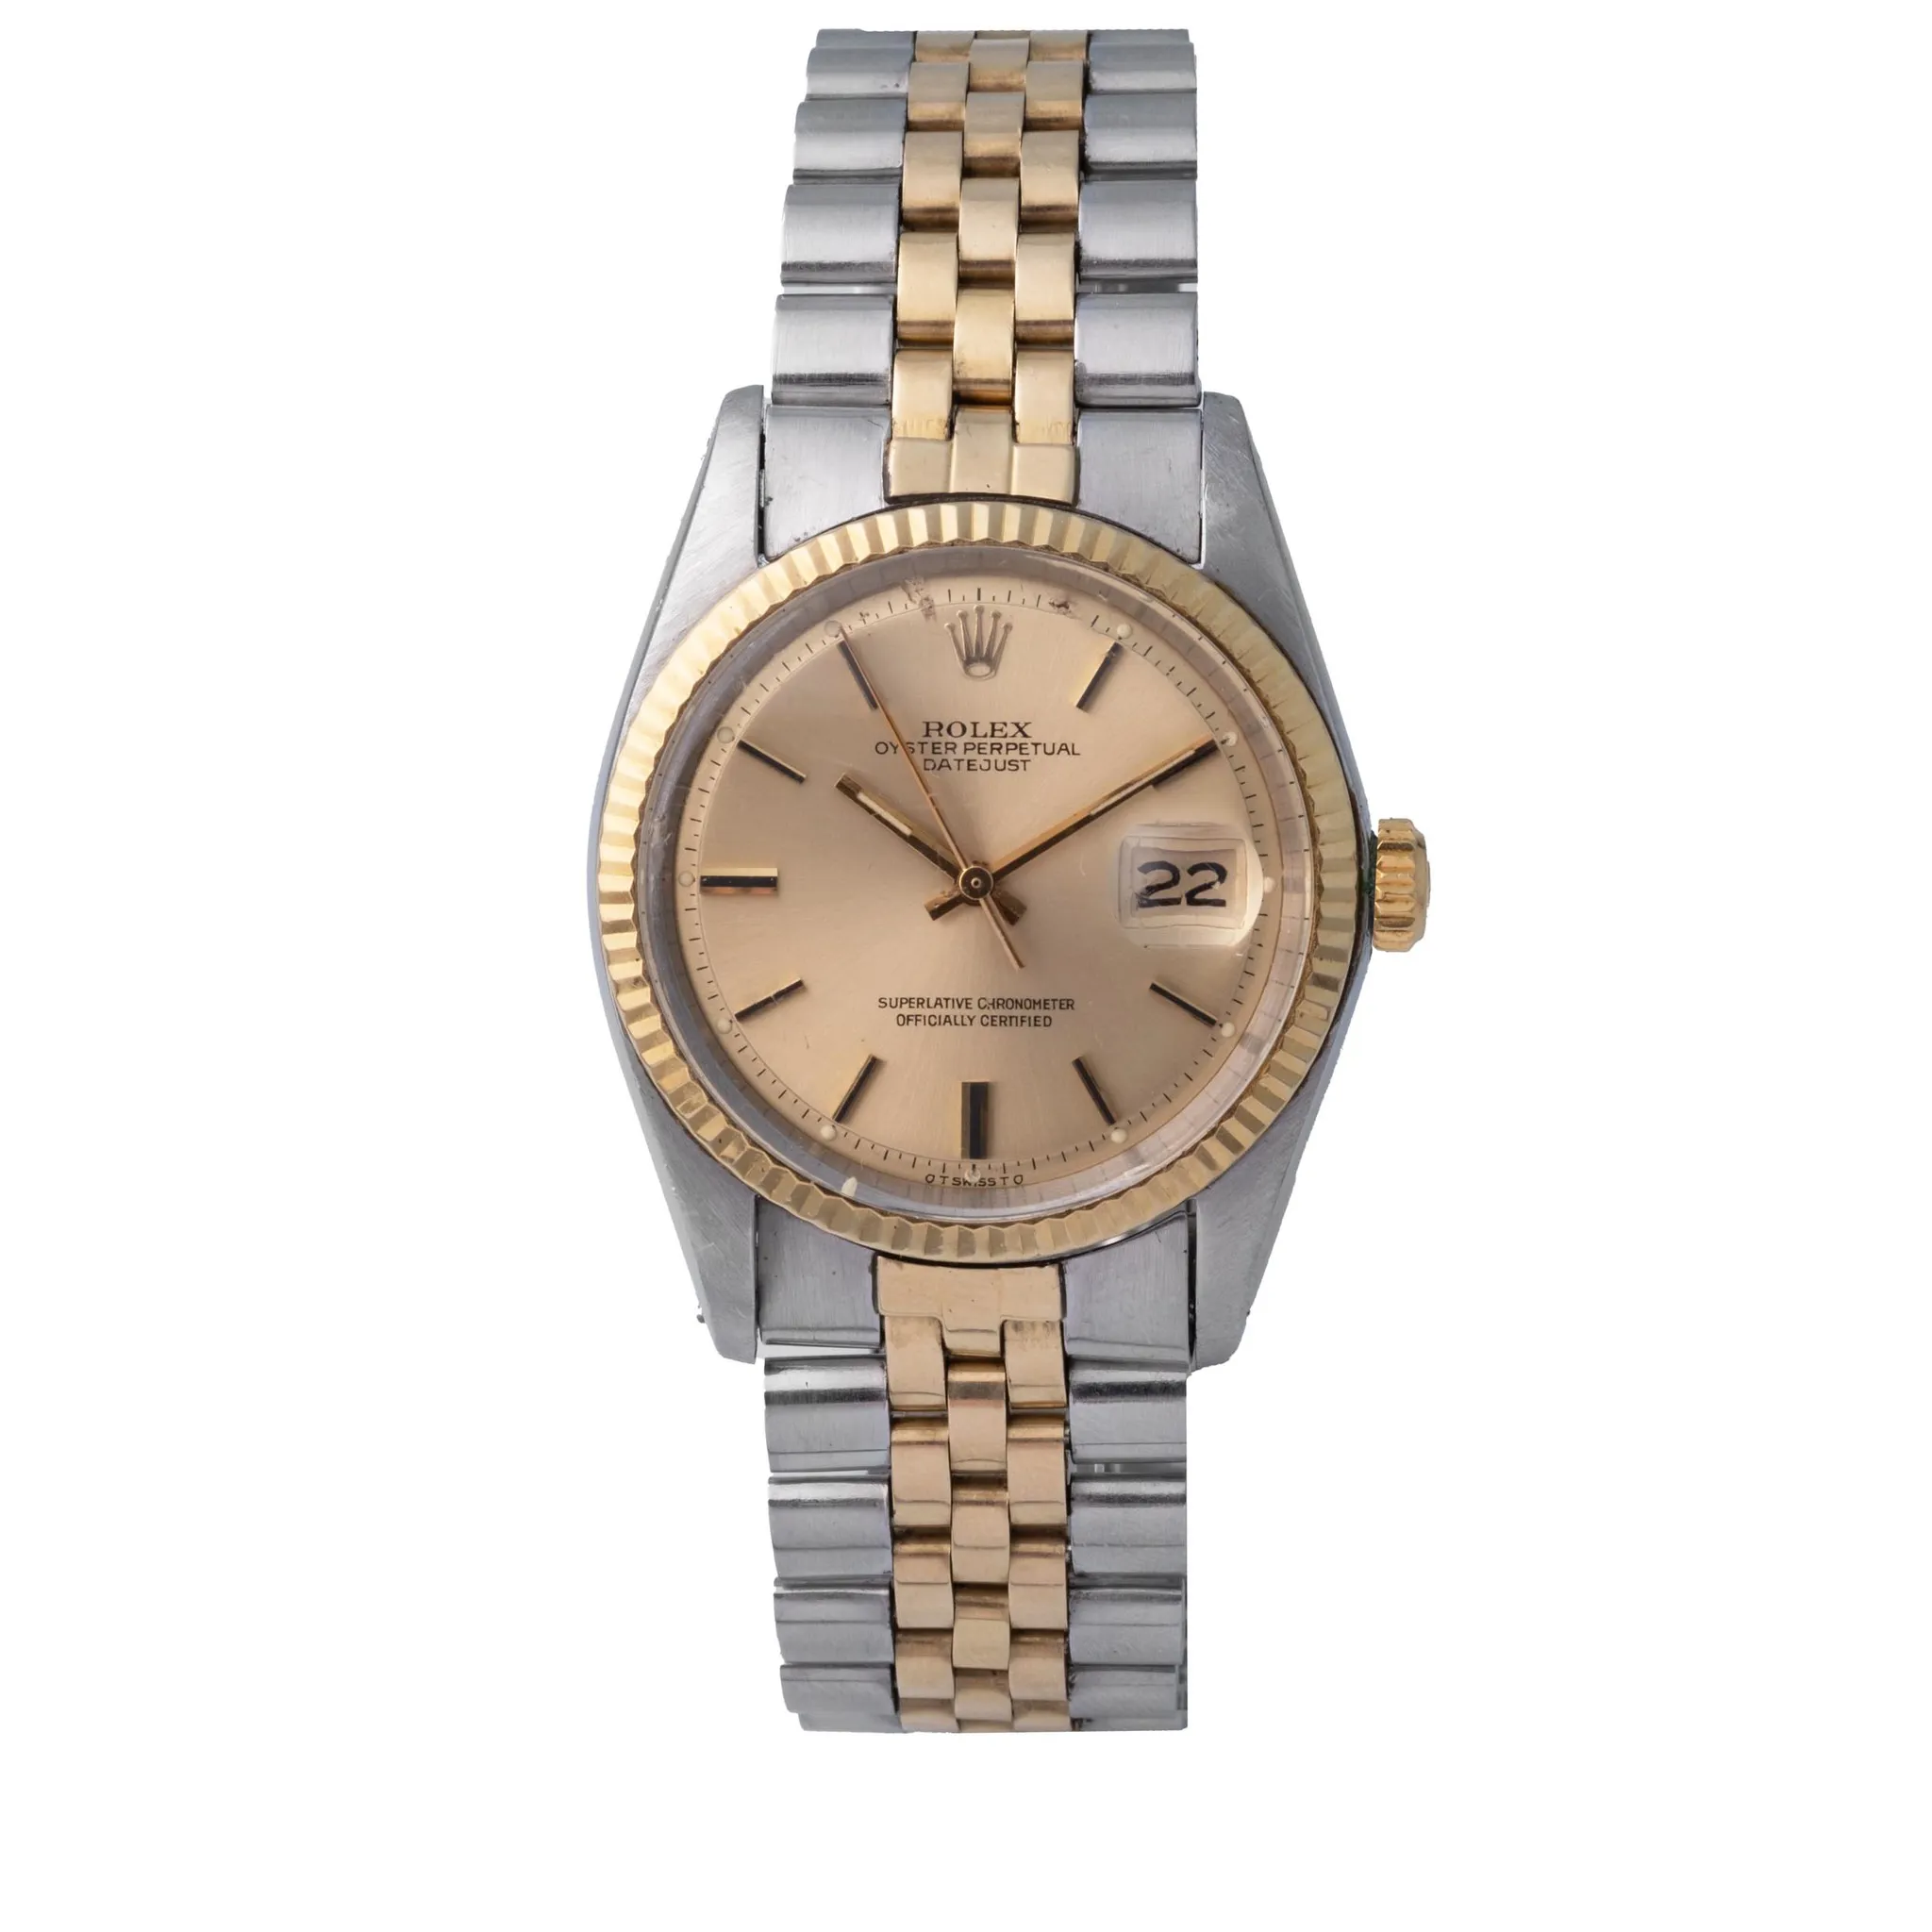 Rolex Datejust 1601 36mm Yellow gold and stainless steel Golden